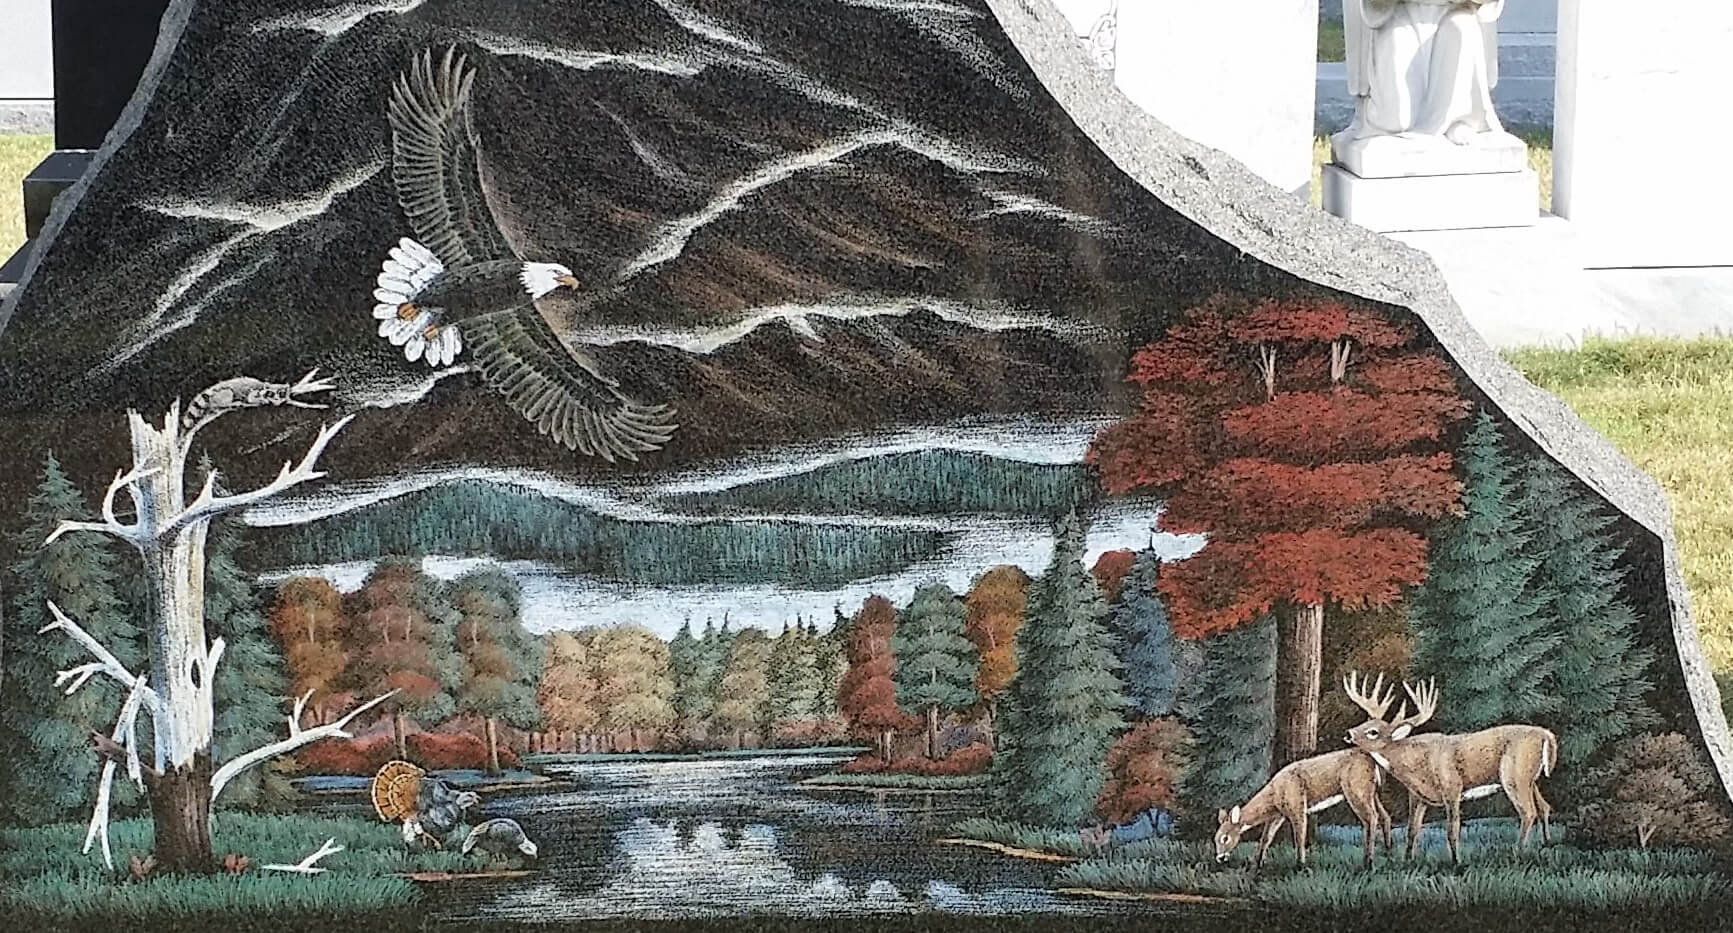 A beautiful piece of artwork with eagle and deers